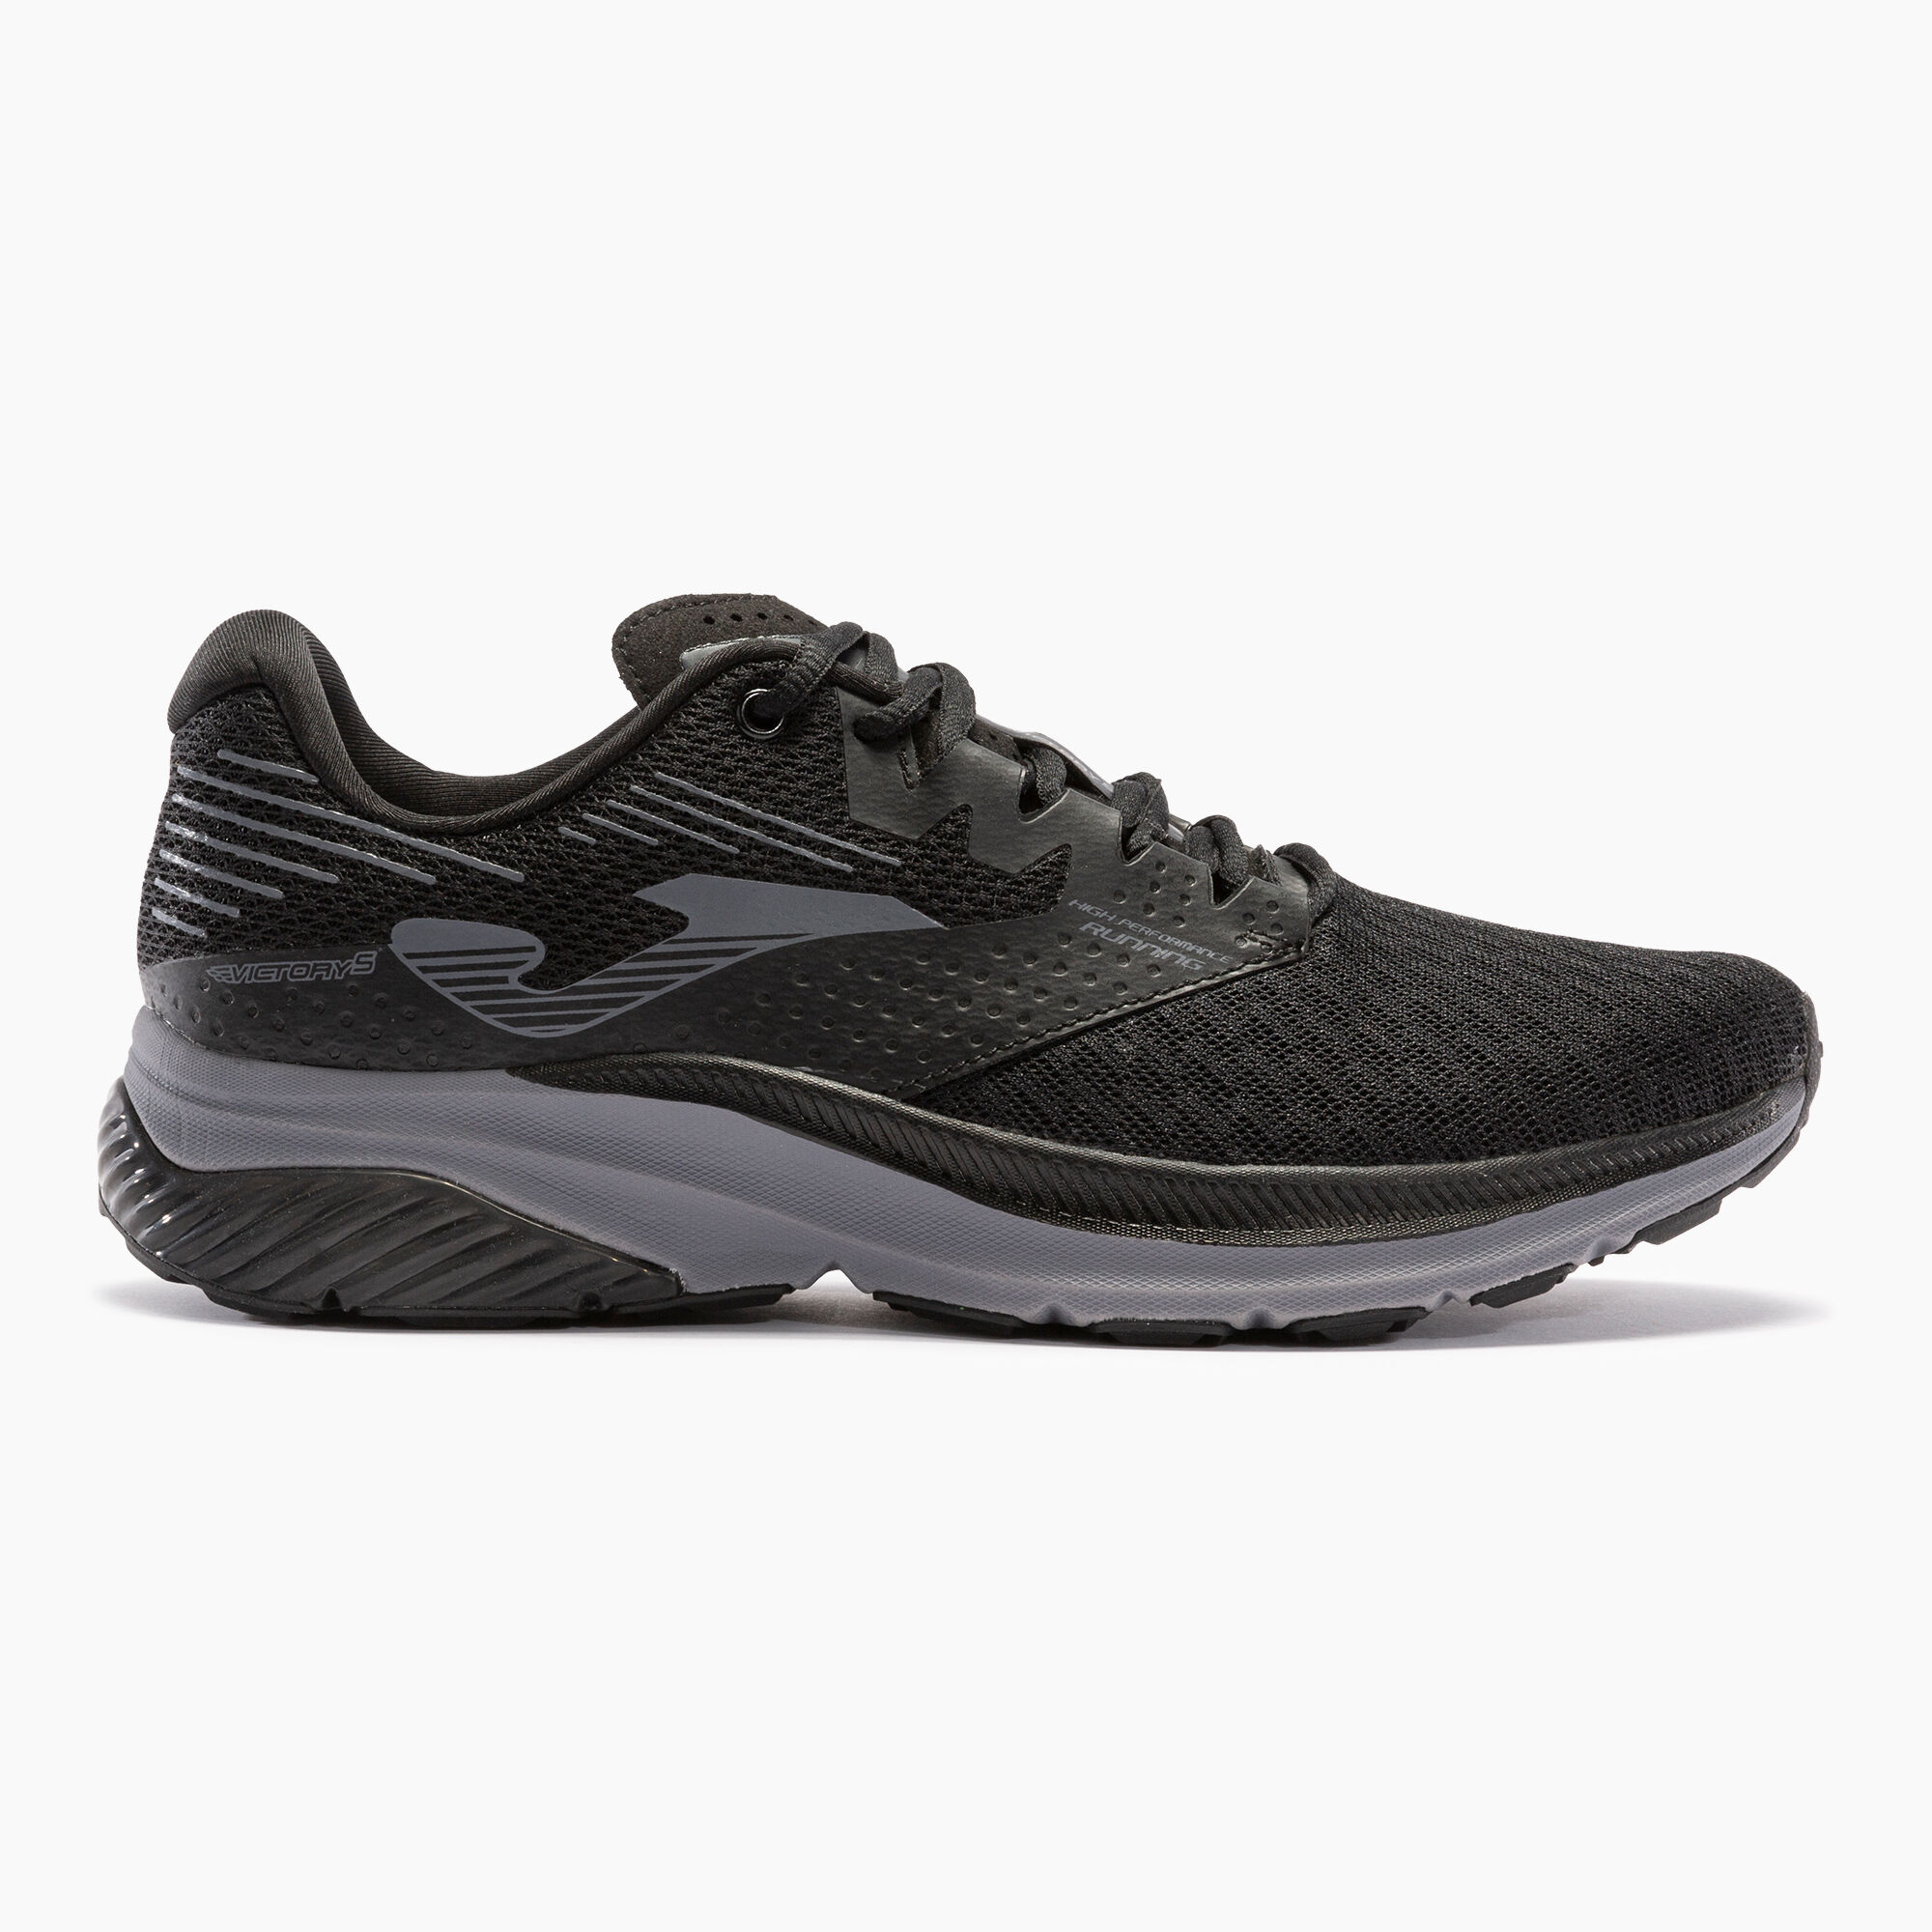 Chaussures running Victory 23 homme noir